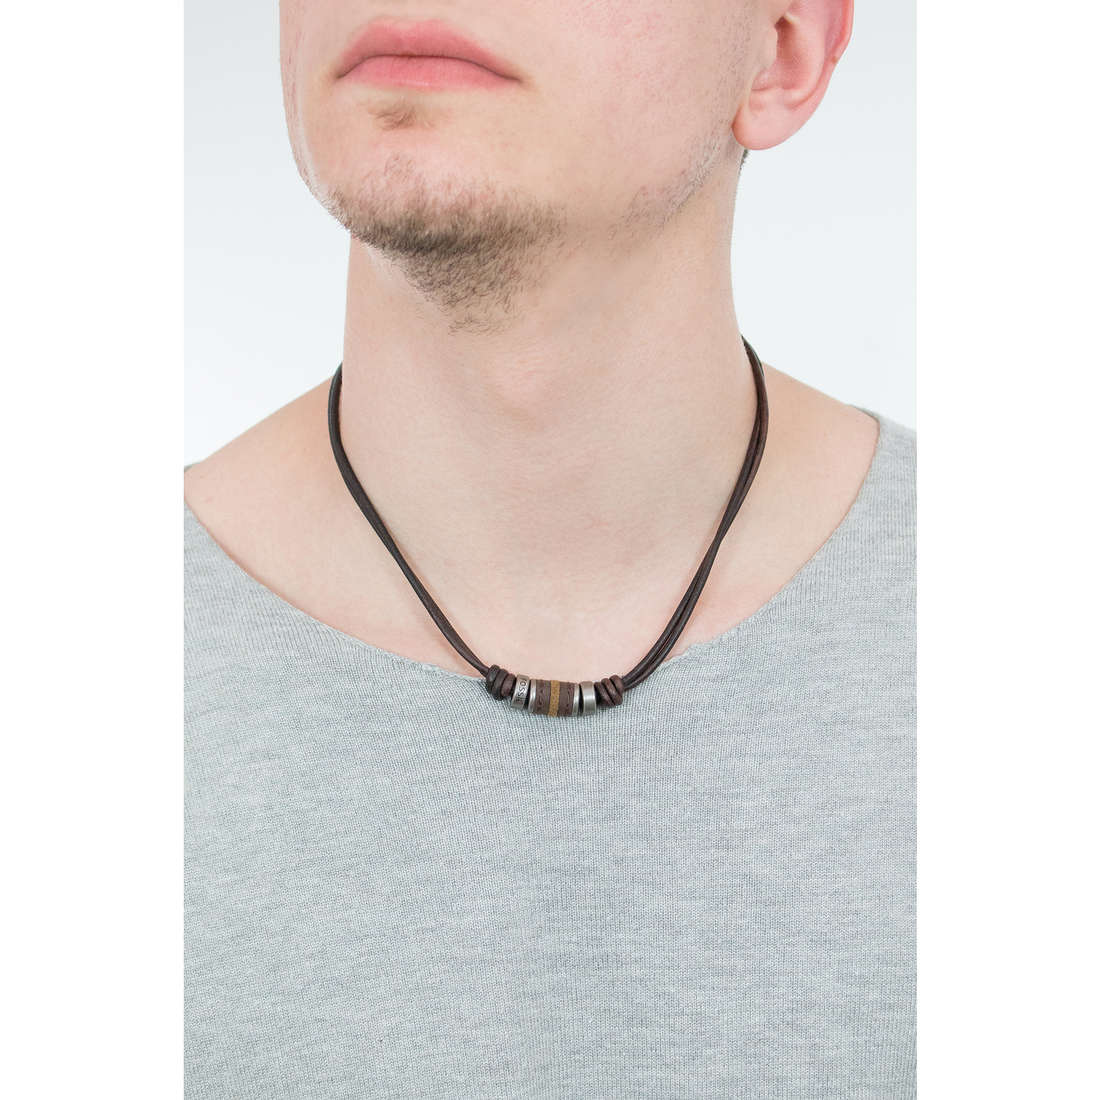 Fossil necklaces Fall 2013 man JF00899797 wearing